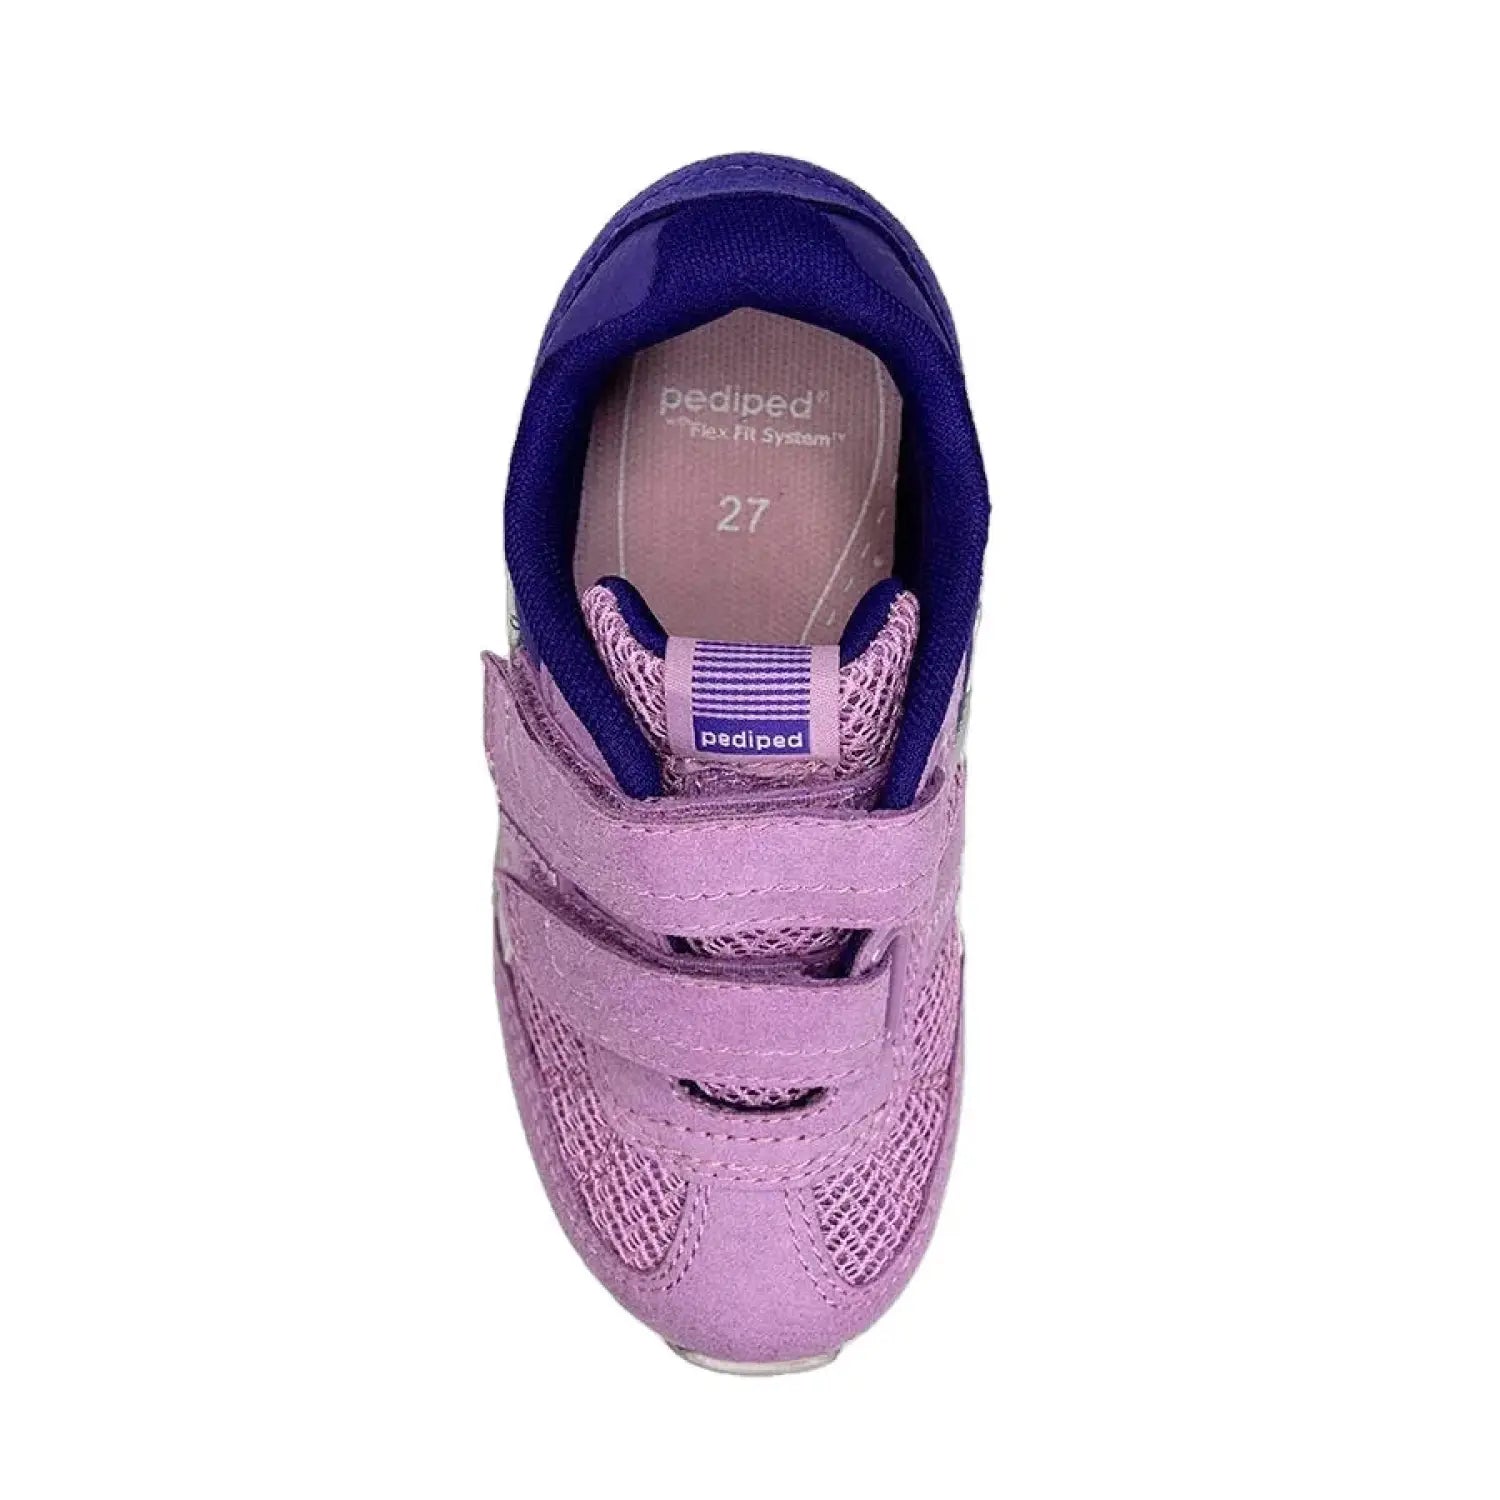 Pediped Flex® Gehrig Kids Shoes shown in Viola - s top view. Purple shoe with blue and silver accent colors. 